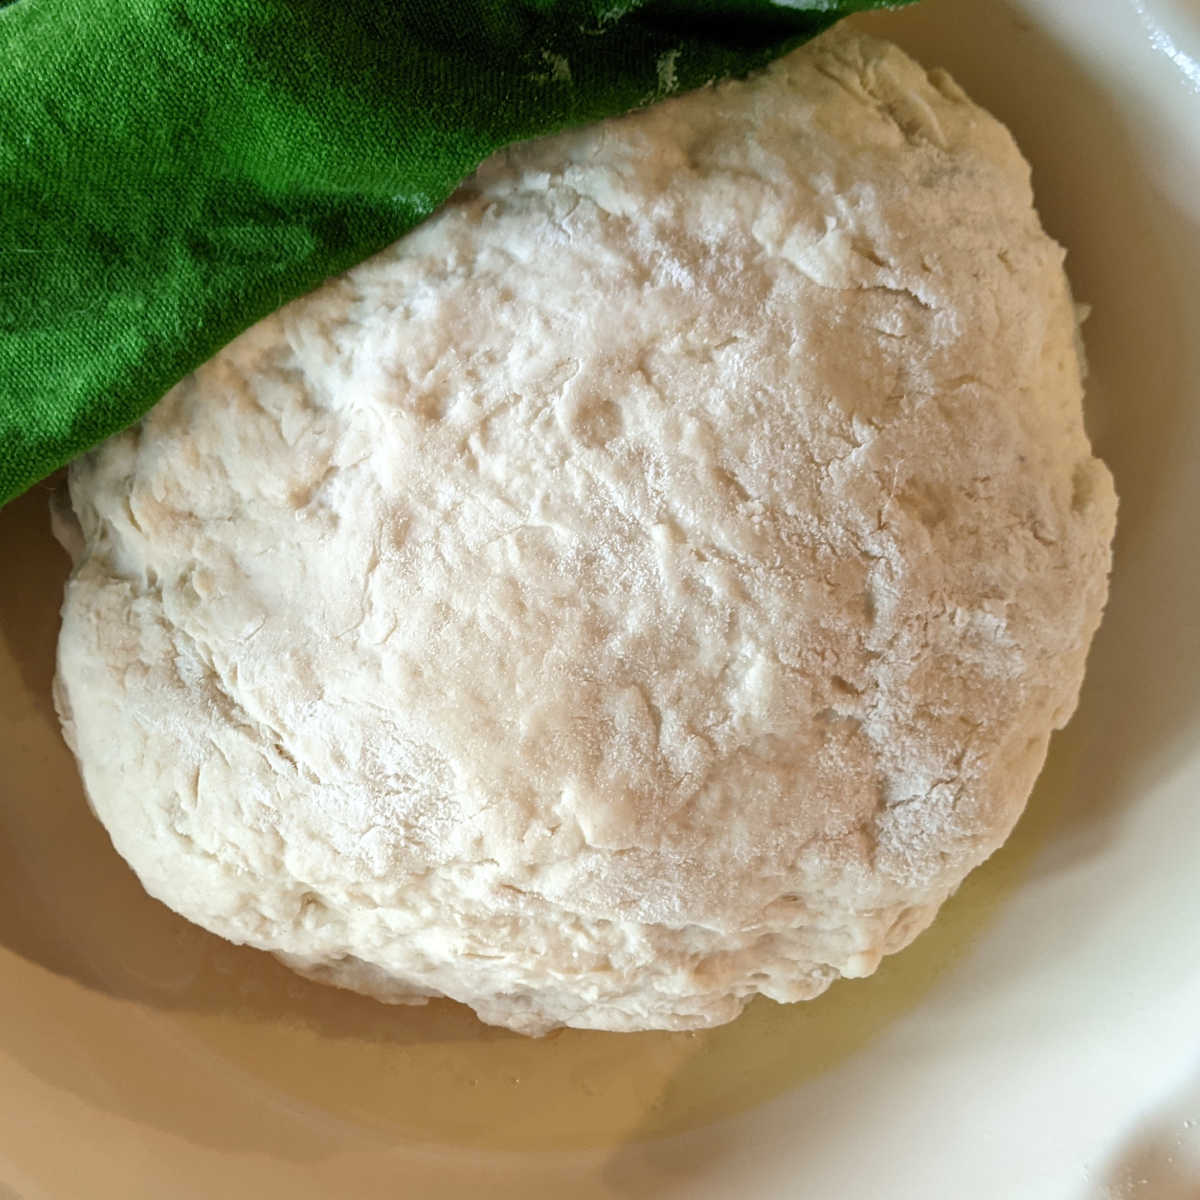 bread dough with yeast before it has risen